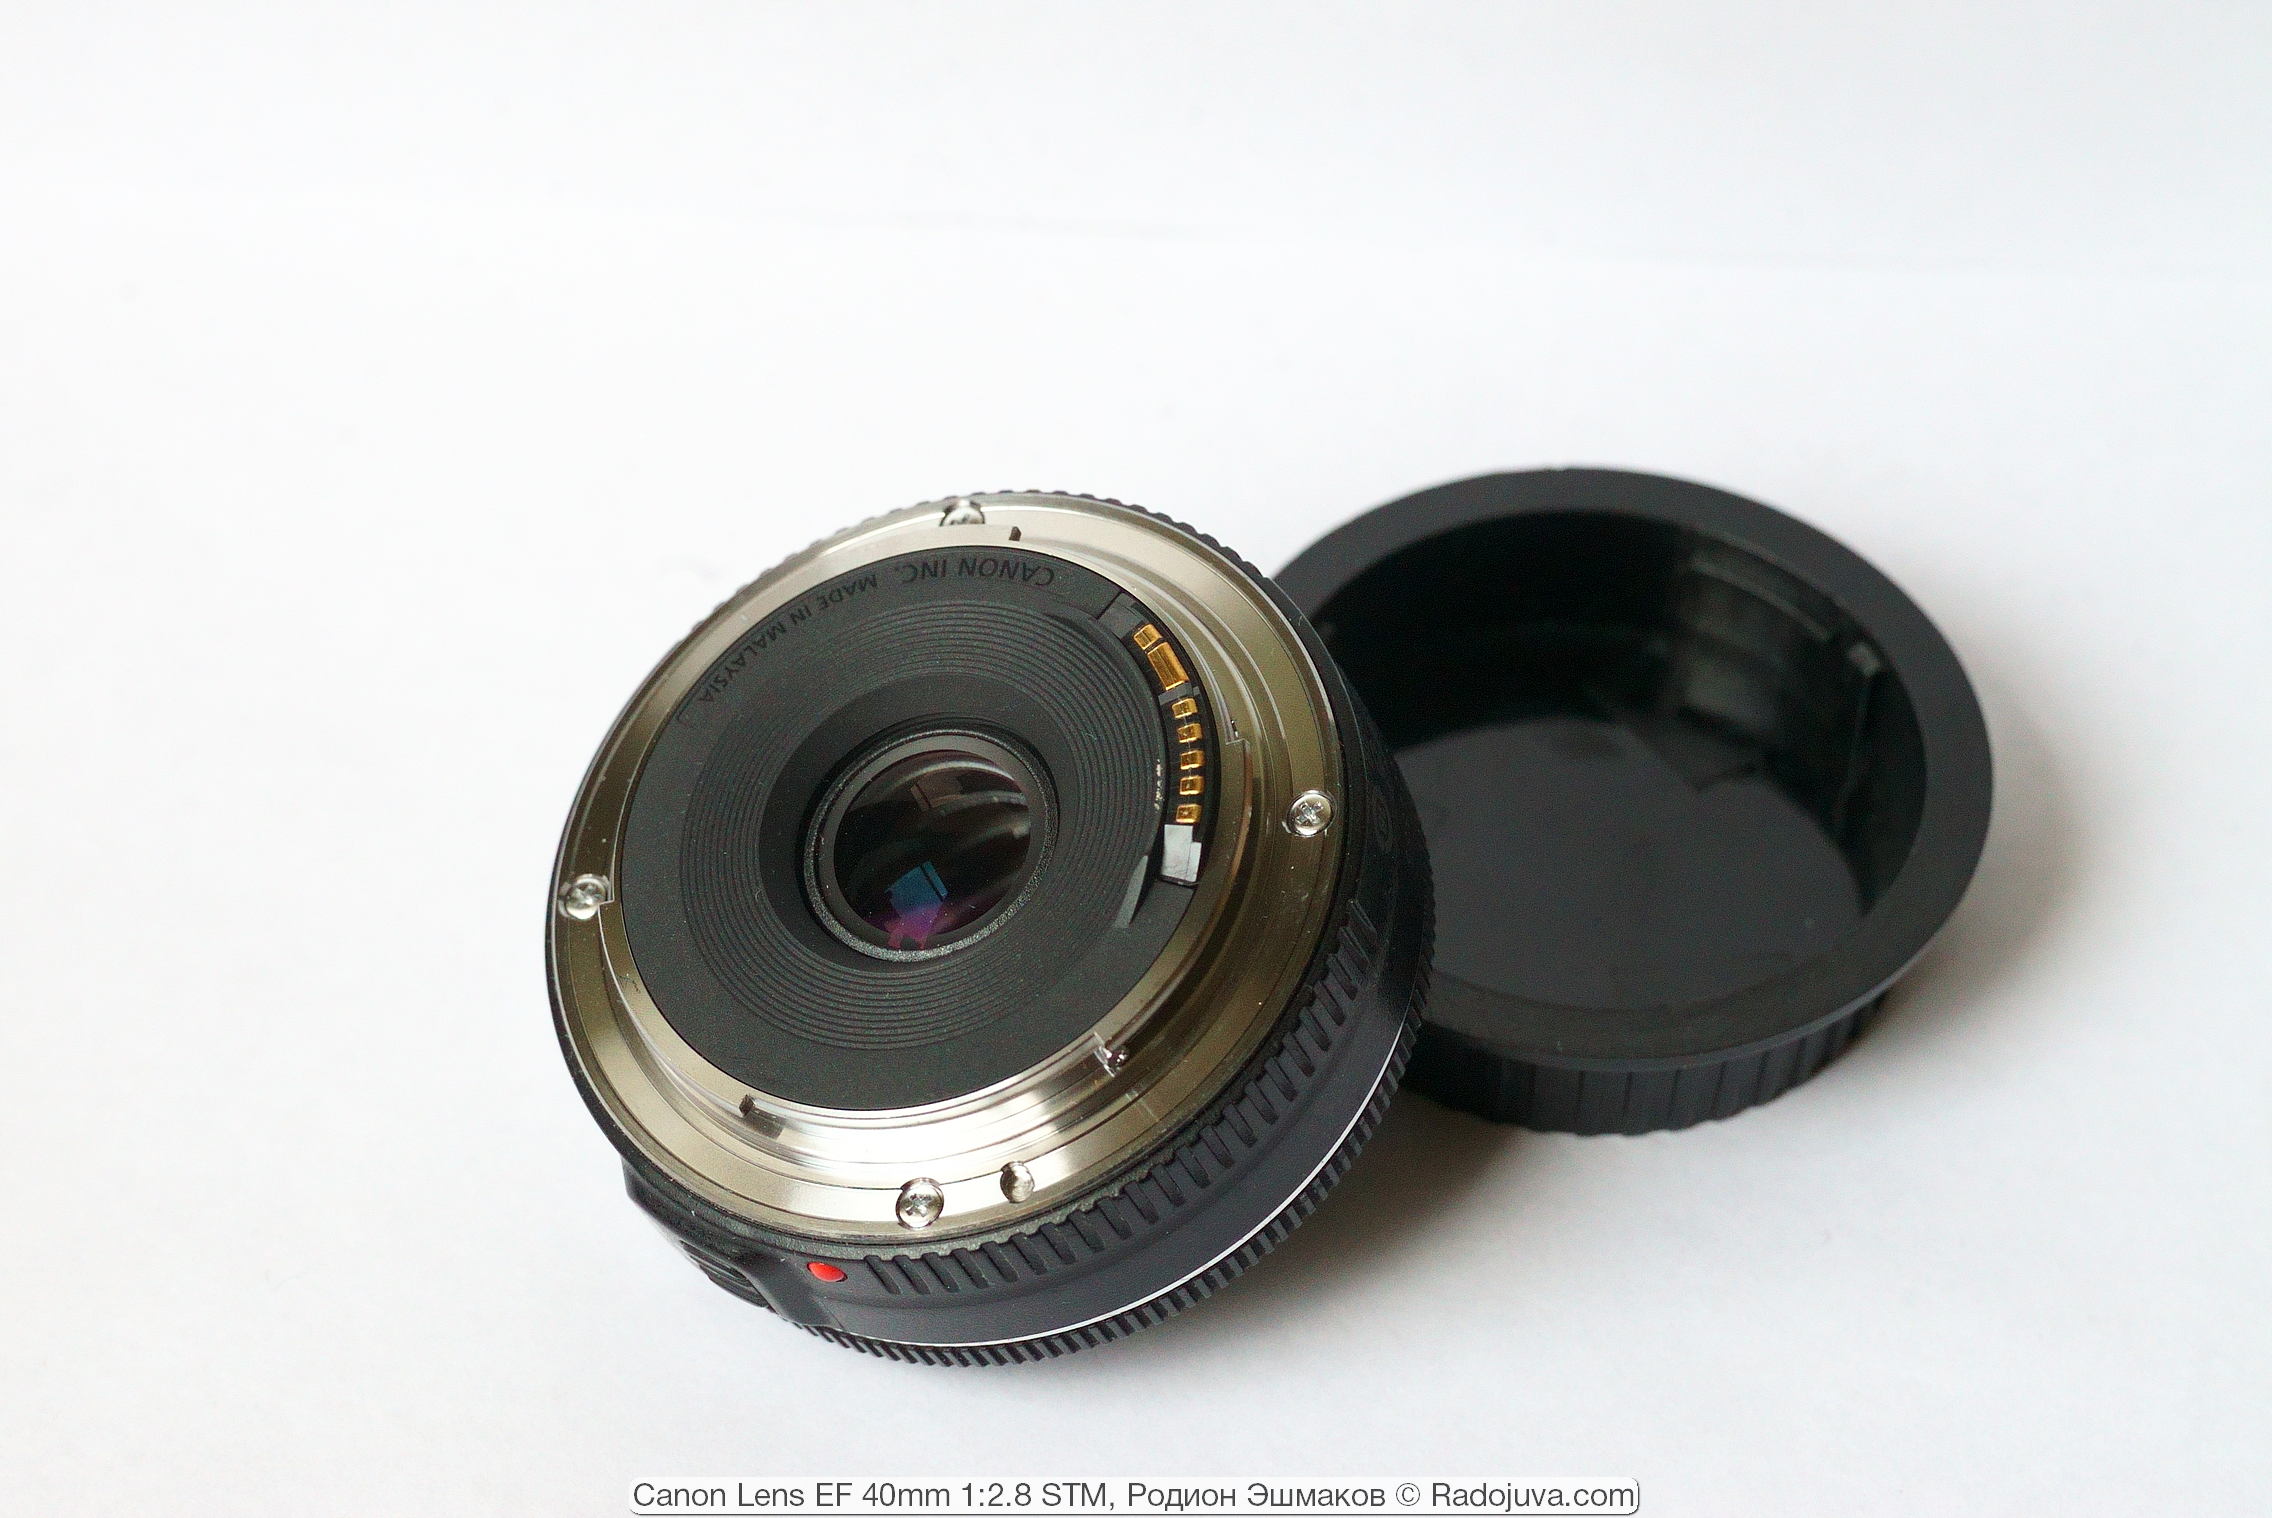 View of the lens from the mount side.